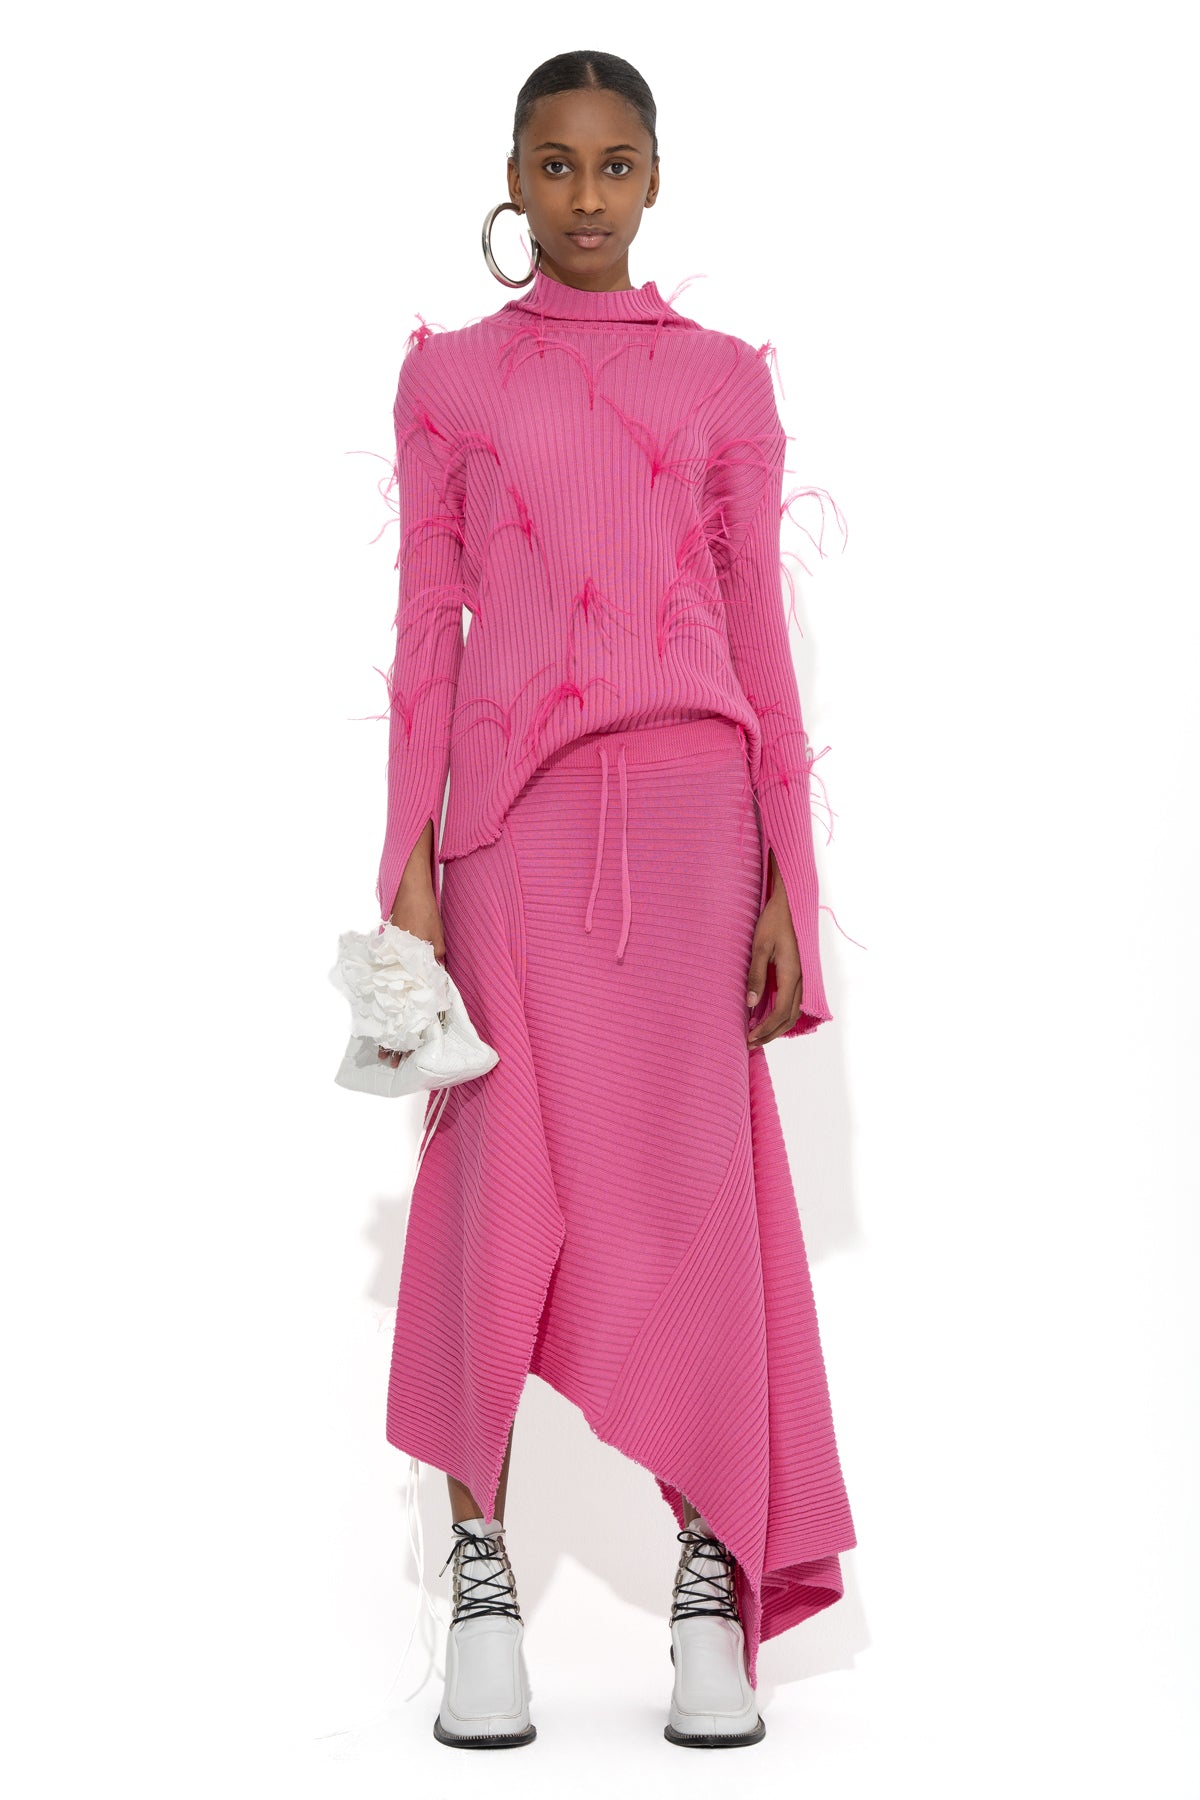 PINK MERINO FITTED FEATHER TURTLENECK marques almeida